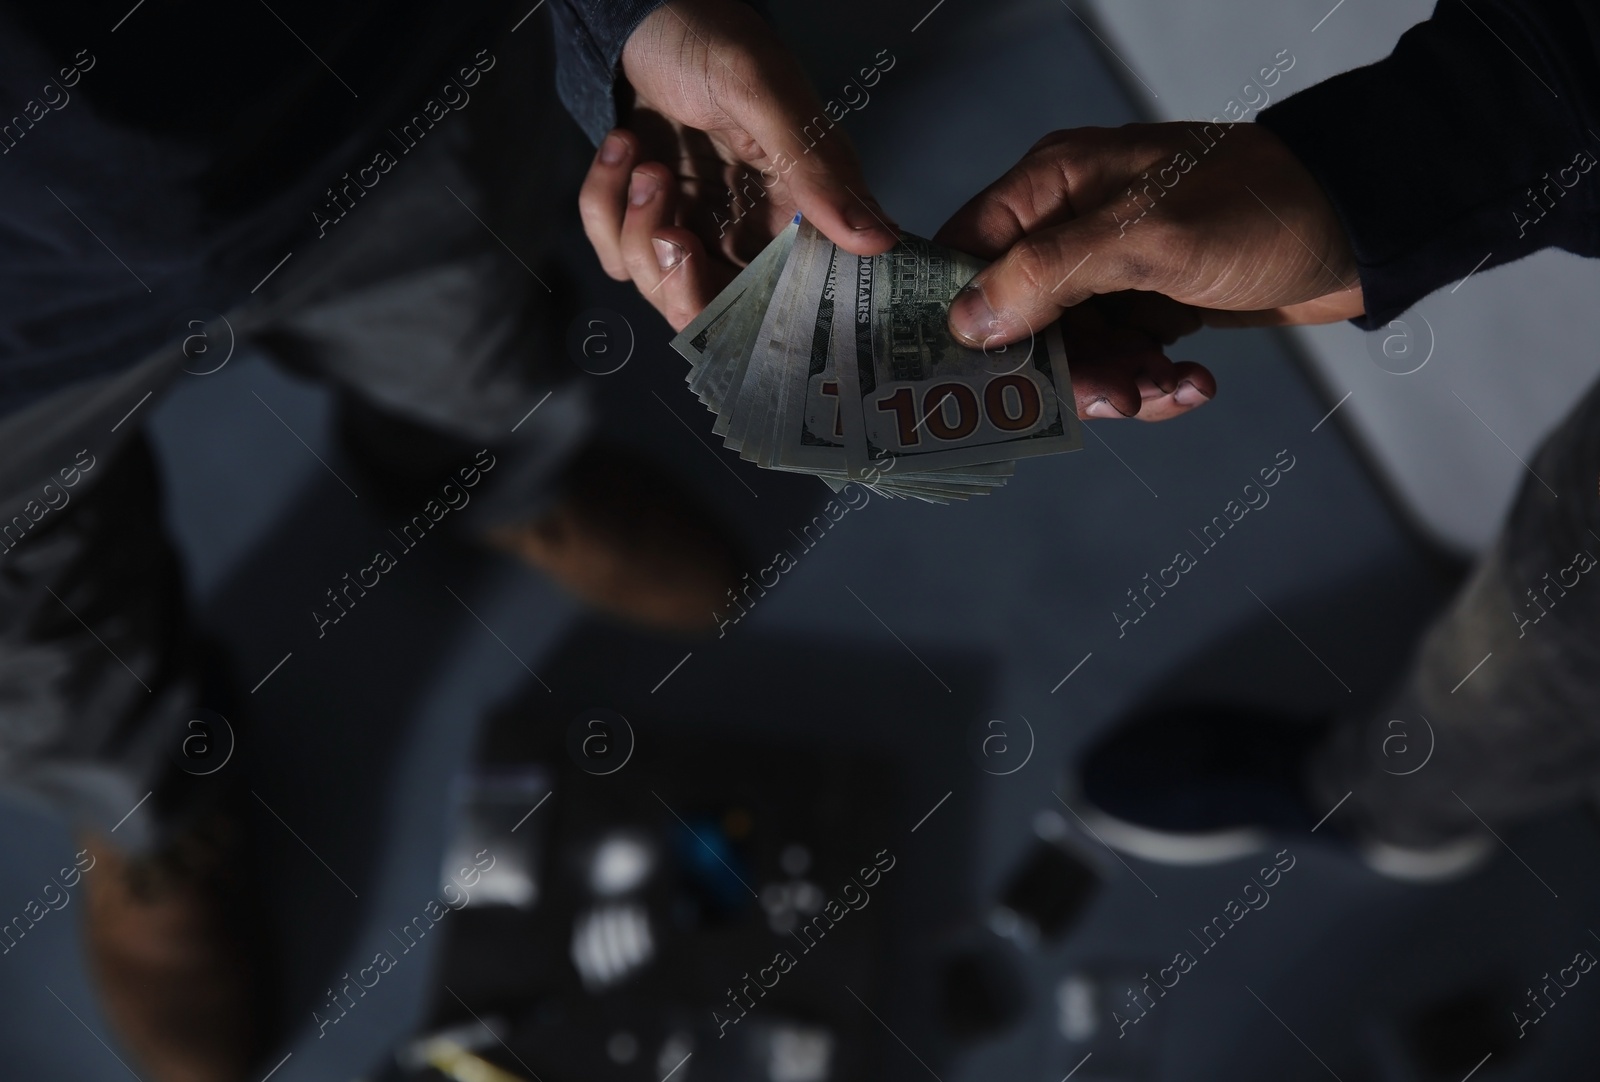 Photo of Addicted man buying drugs from dealer on blurred background, closeup